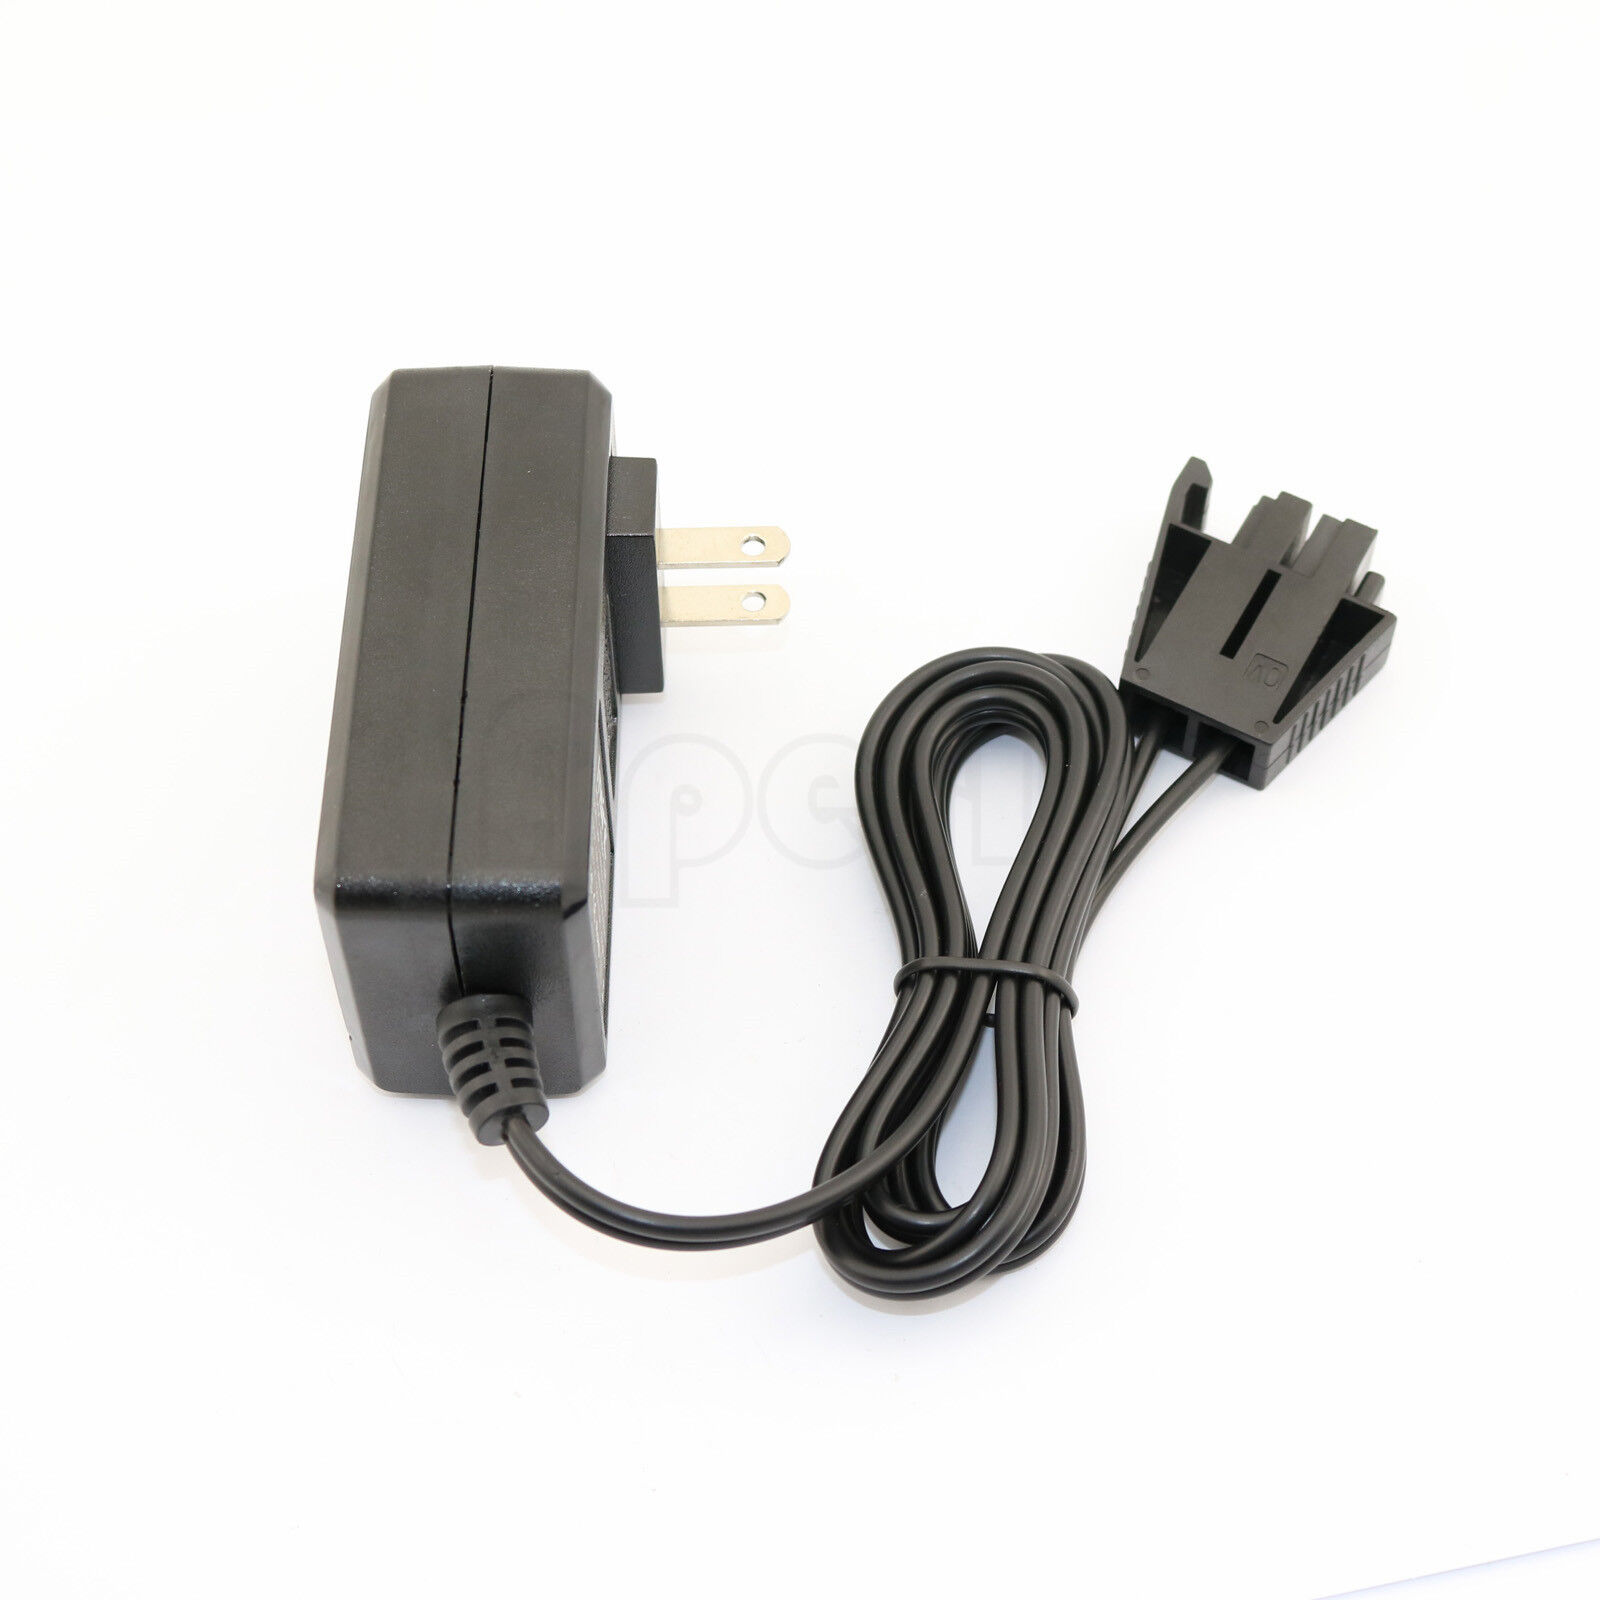 NEW Battery Charger Adaptor For Vax VX58 Stick Vac Vacuum Cleaner AU STOCK MPN does not apply Battery Included No Br - Click Image to Close